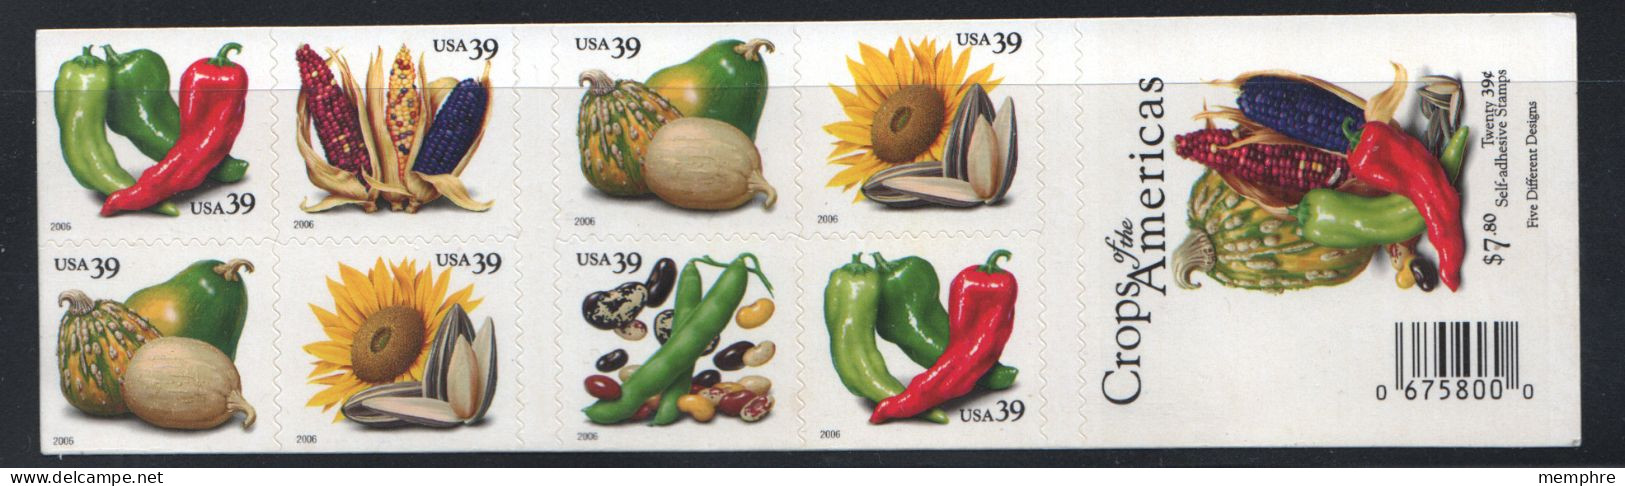 2006  Crops Of The Americas' Chili Peppers, Beans, Sunflower, Squashes, Corn Booklet Of 20 Sc 4012b - Nuevos